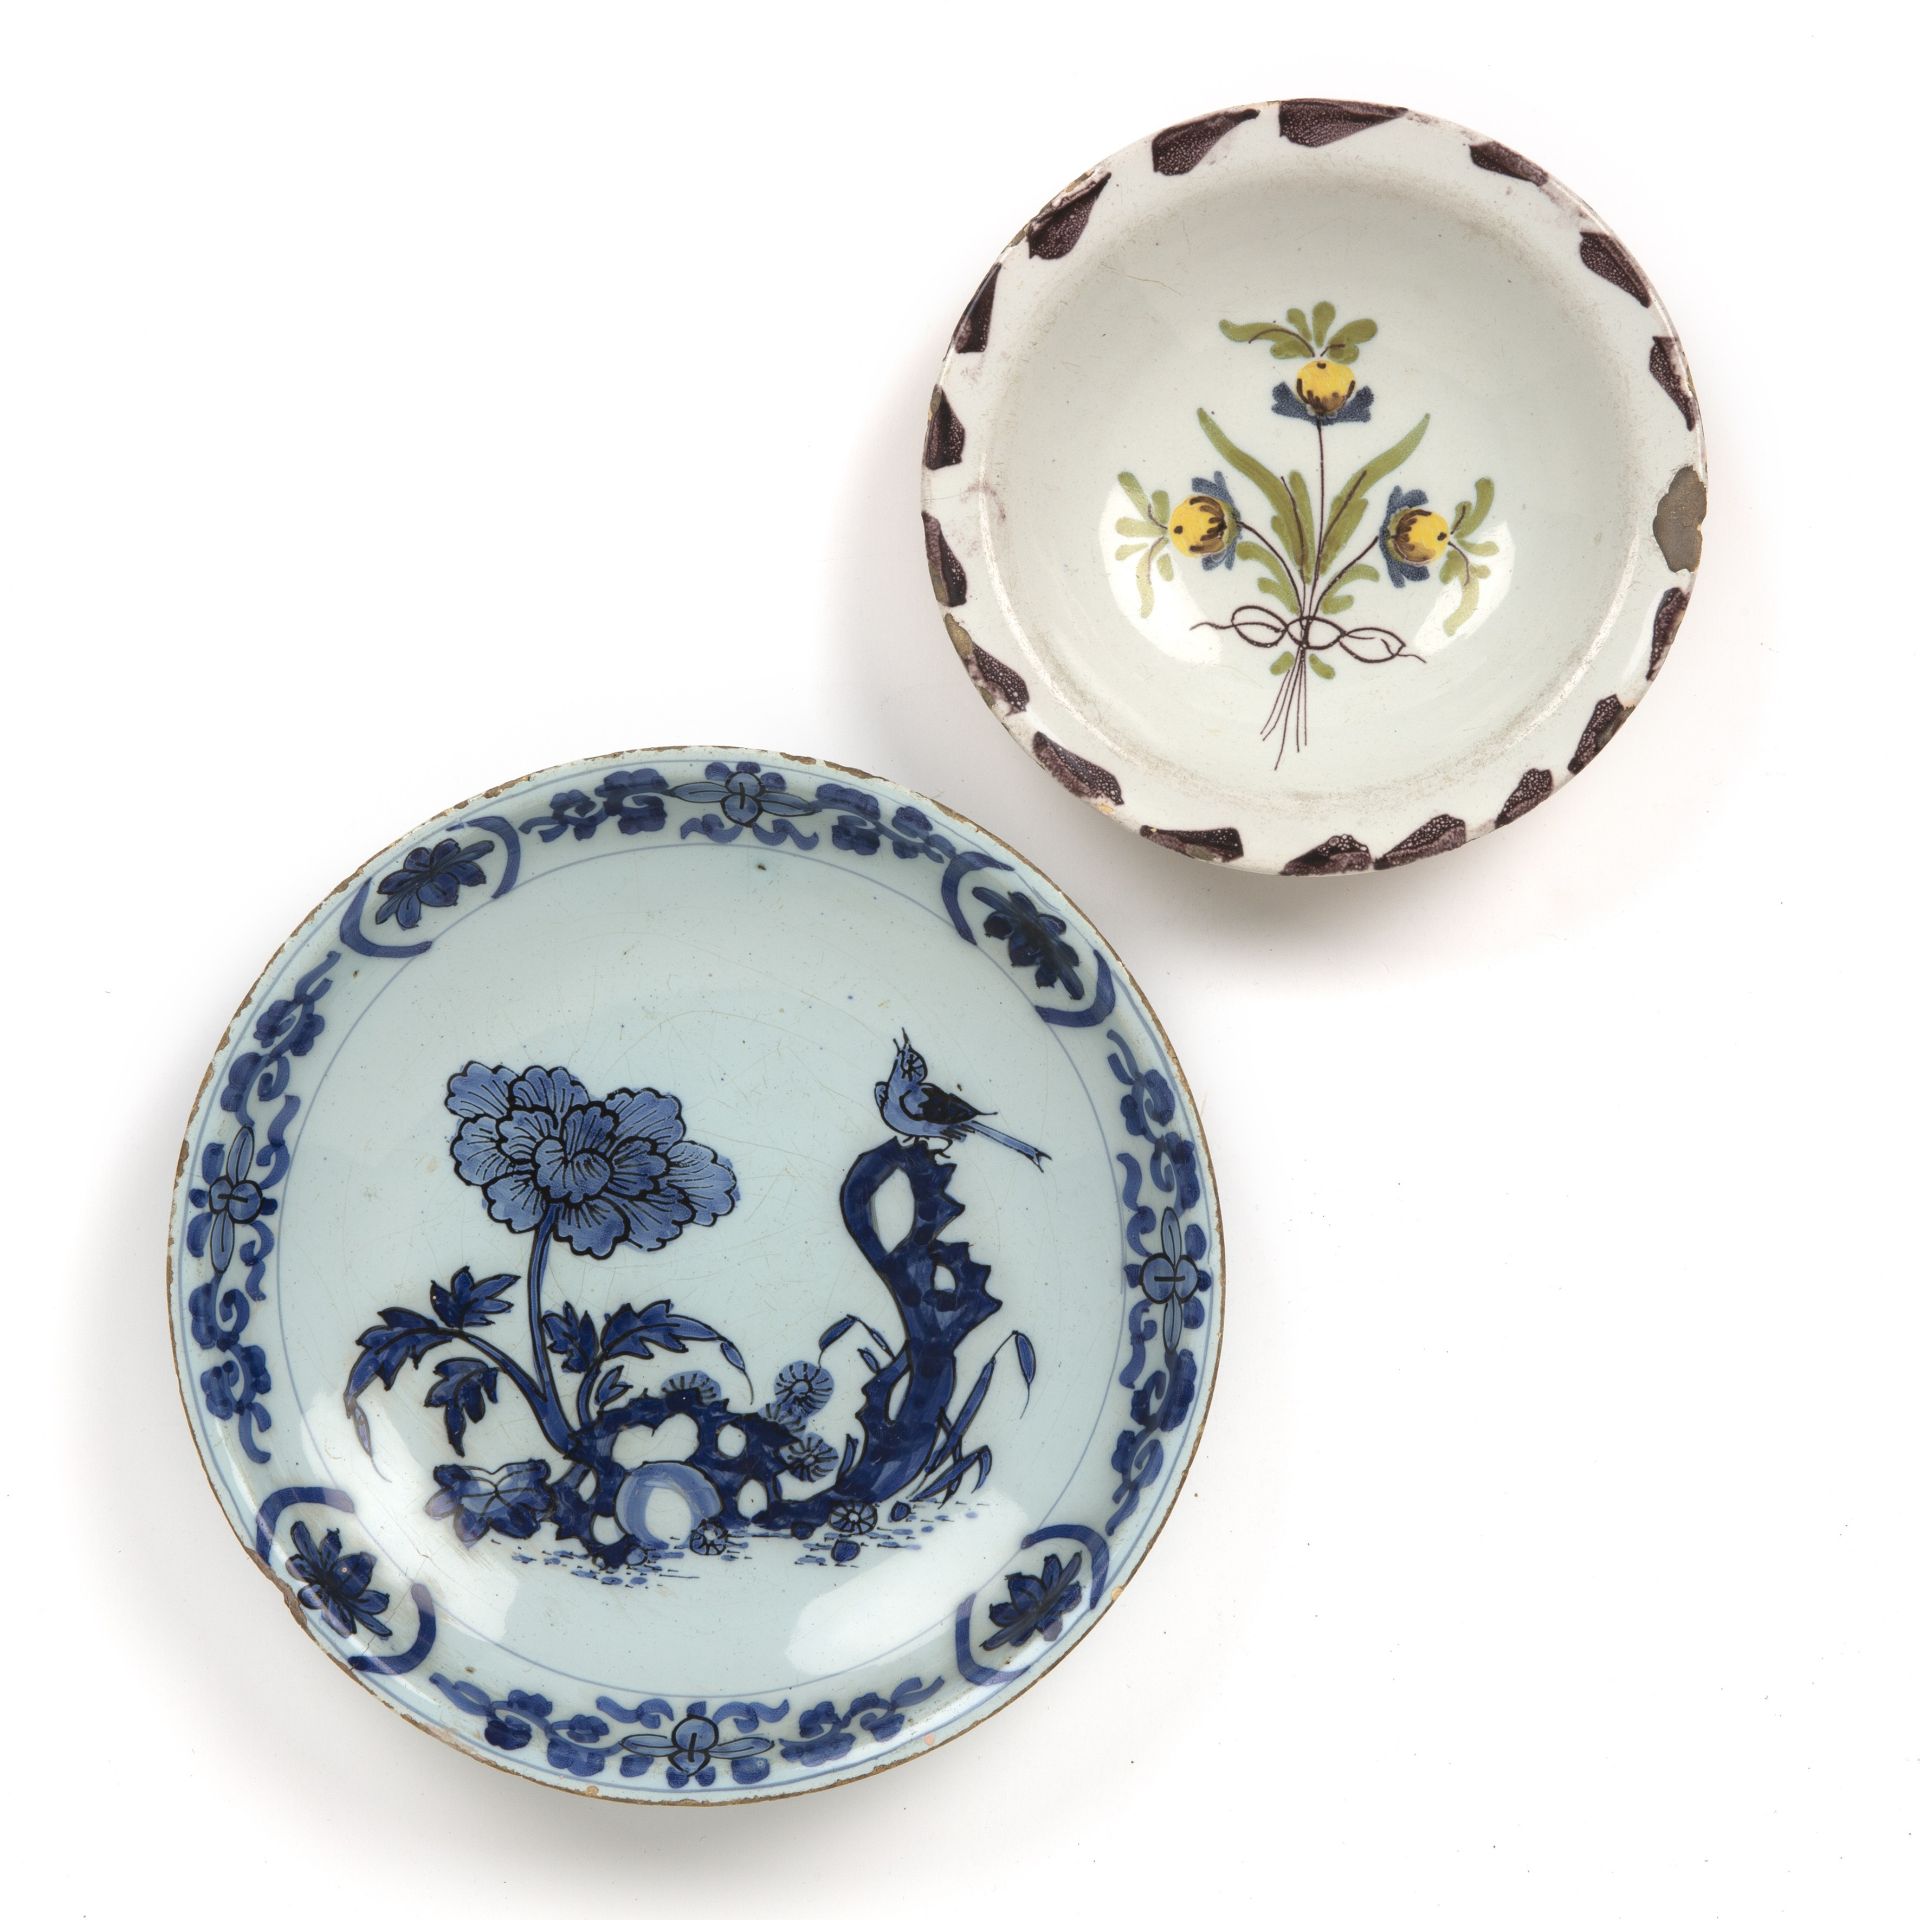 An early Dutch Delft saucer dish circa 1660-1680 21.5cm diameter together with a purple dash charger